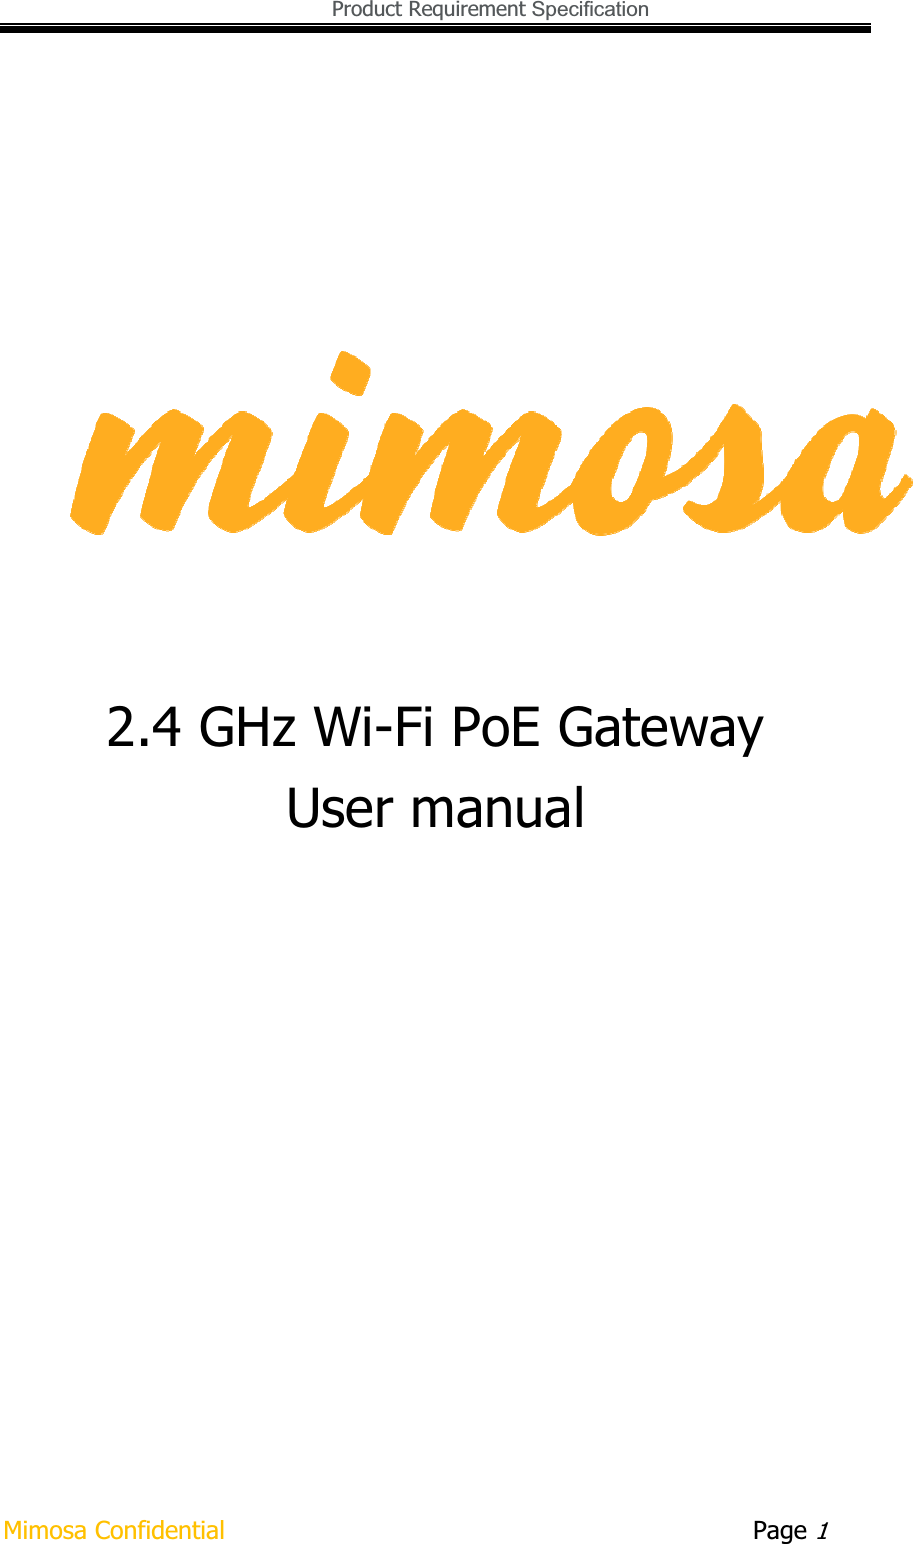   Product Requirement Specification Mimosa Confidential        Page 12.4 GHz Wi-Fi PoE Gateway User manual 